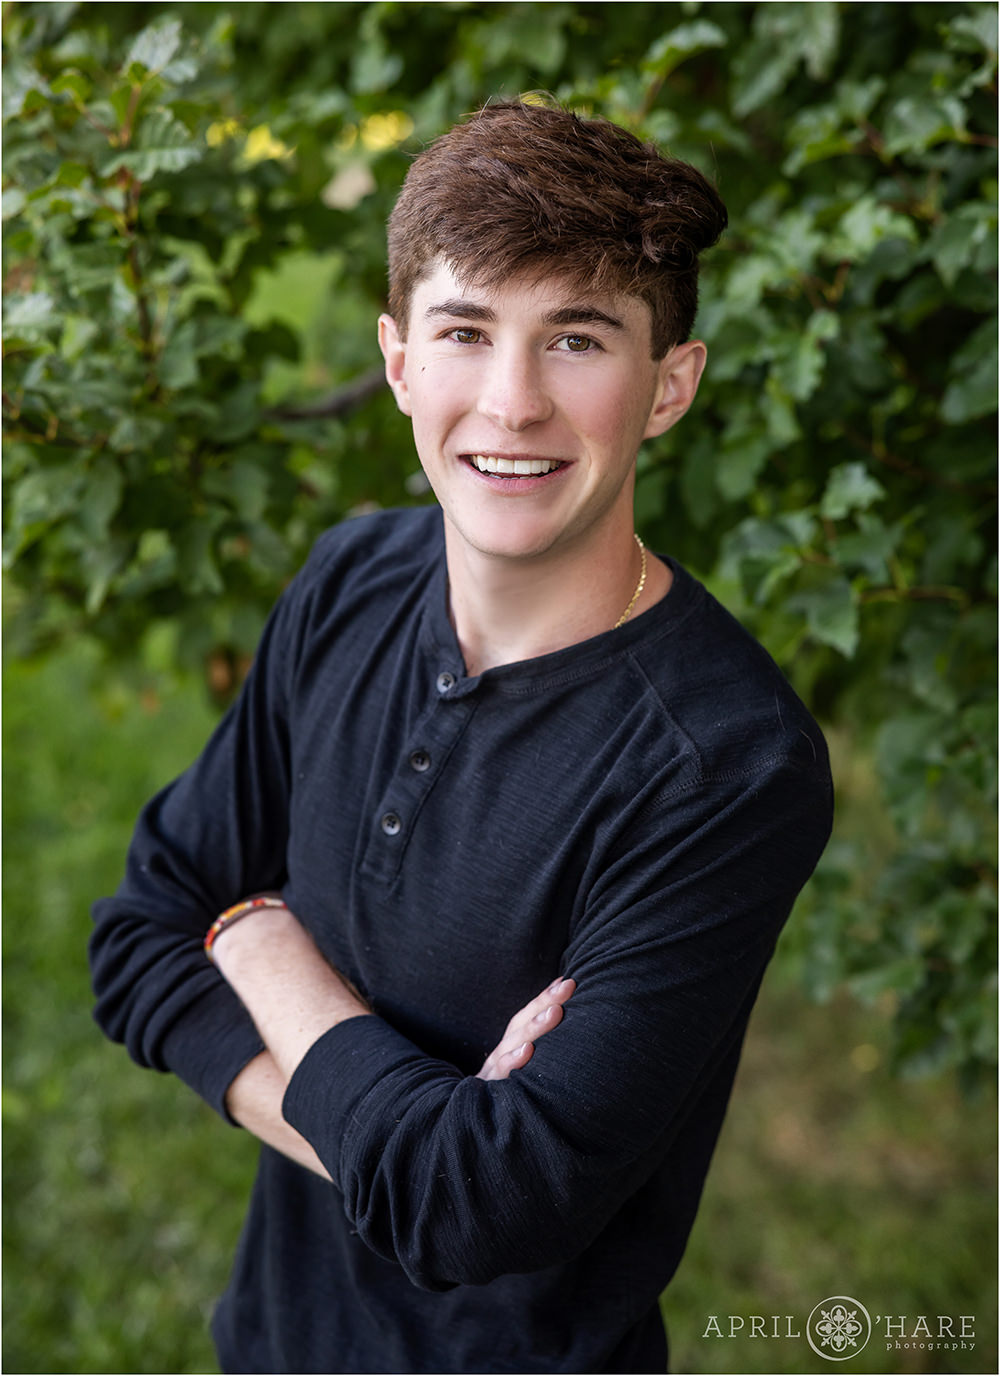 Simple greenery backdrop for a high school yearbook portrait at Tommy Davis Park in Greenwood Village, CO